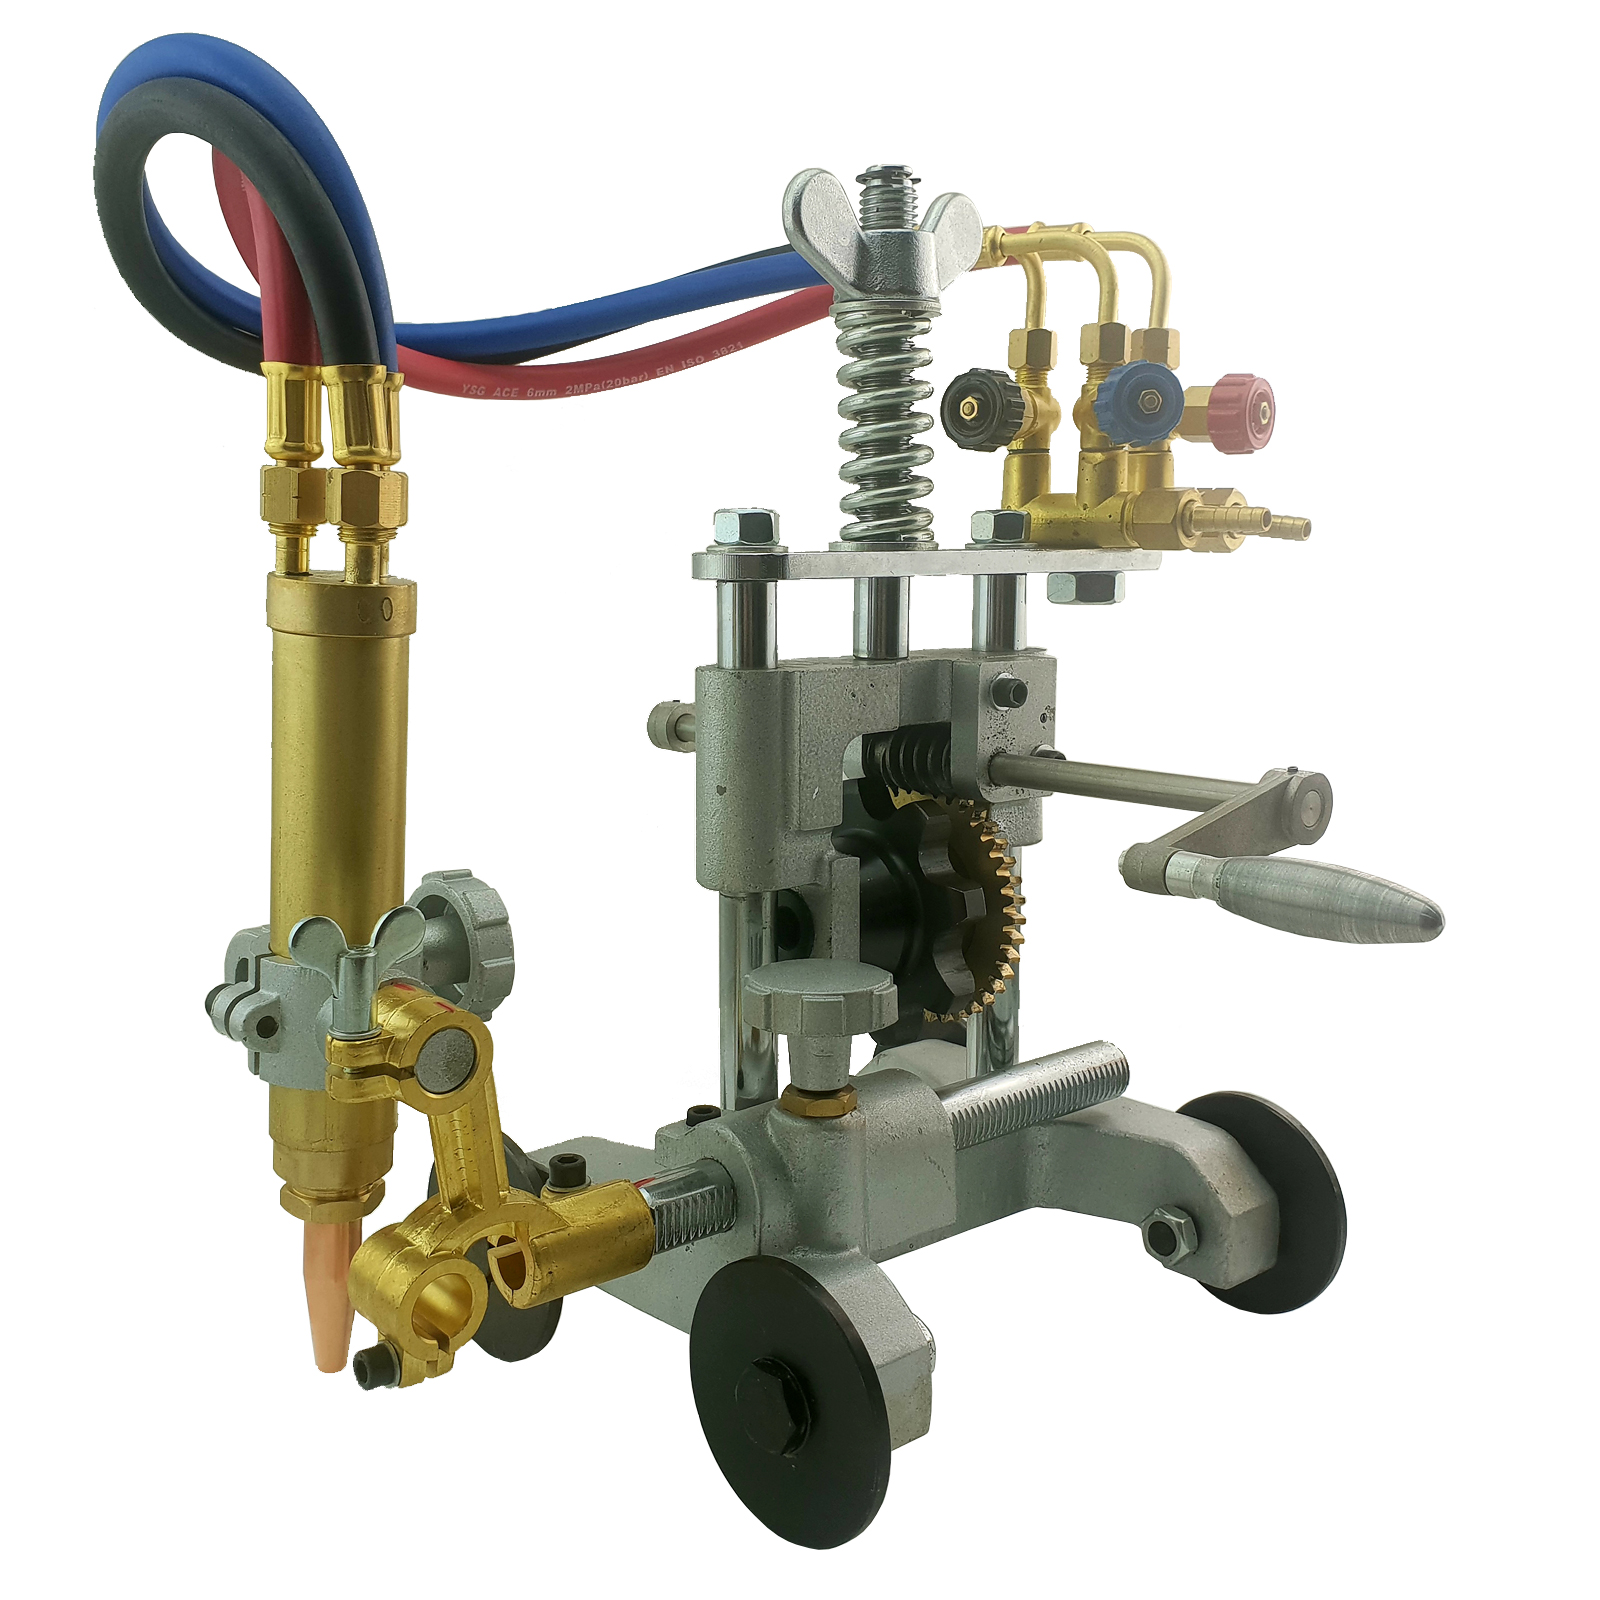 Gas Pipe Cutter Machine with Chain for Oxy / Acetylene Cutting